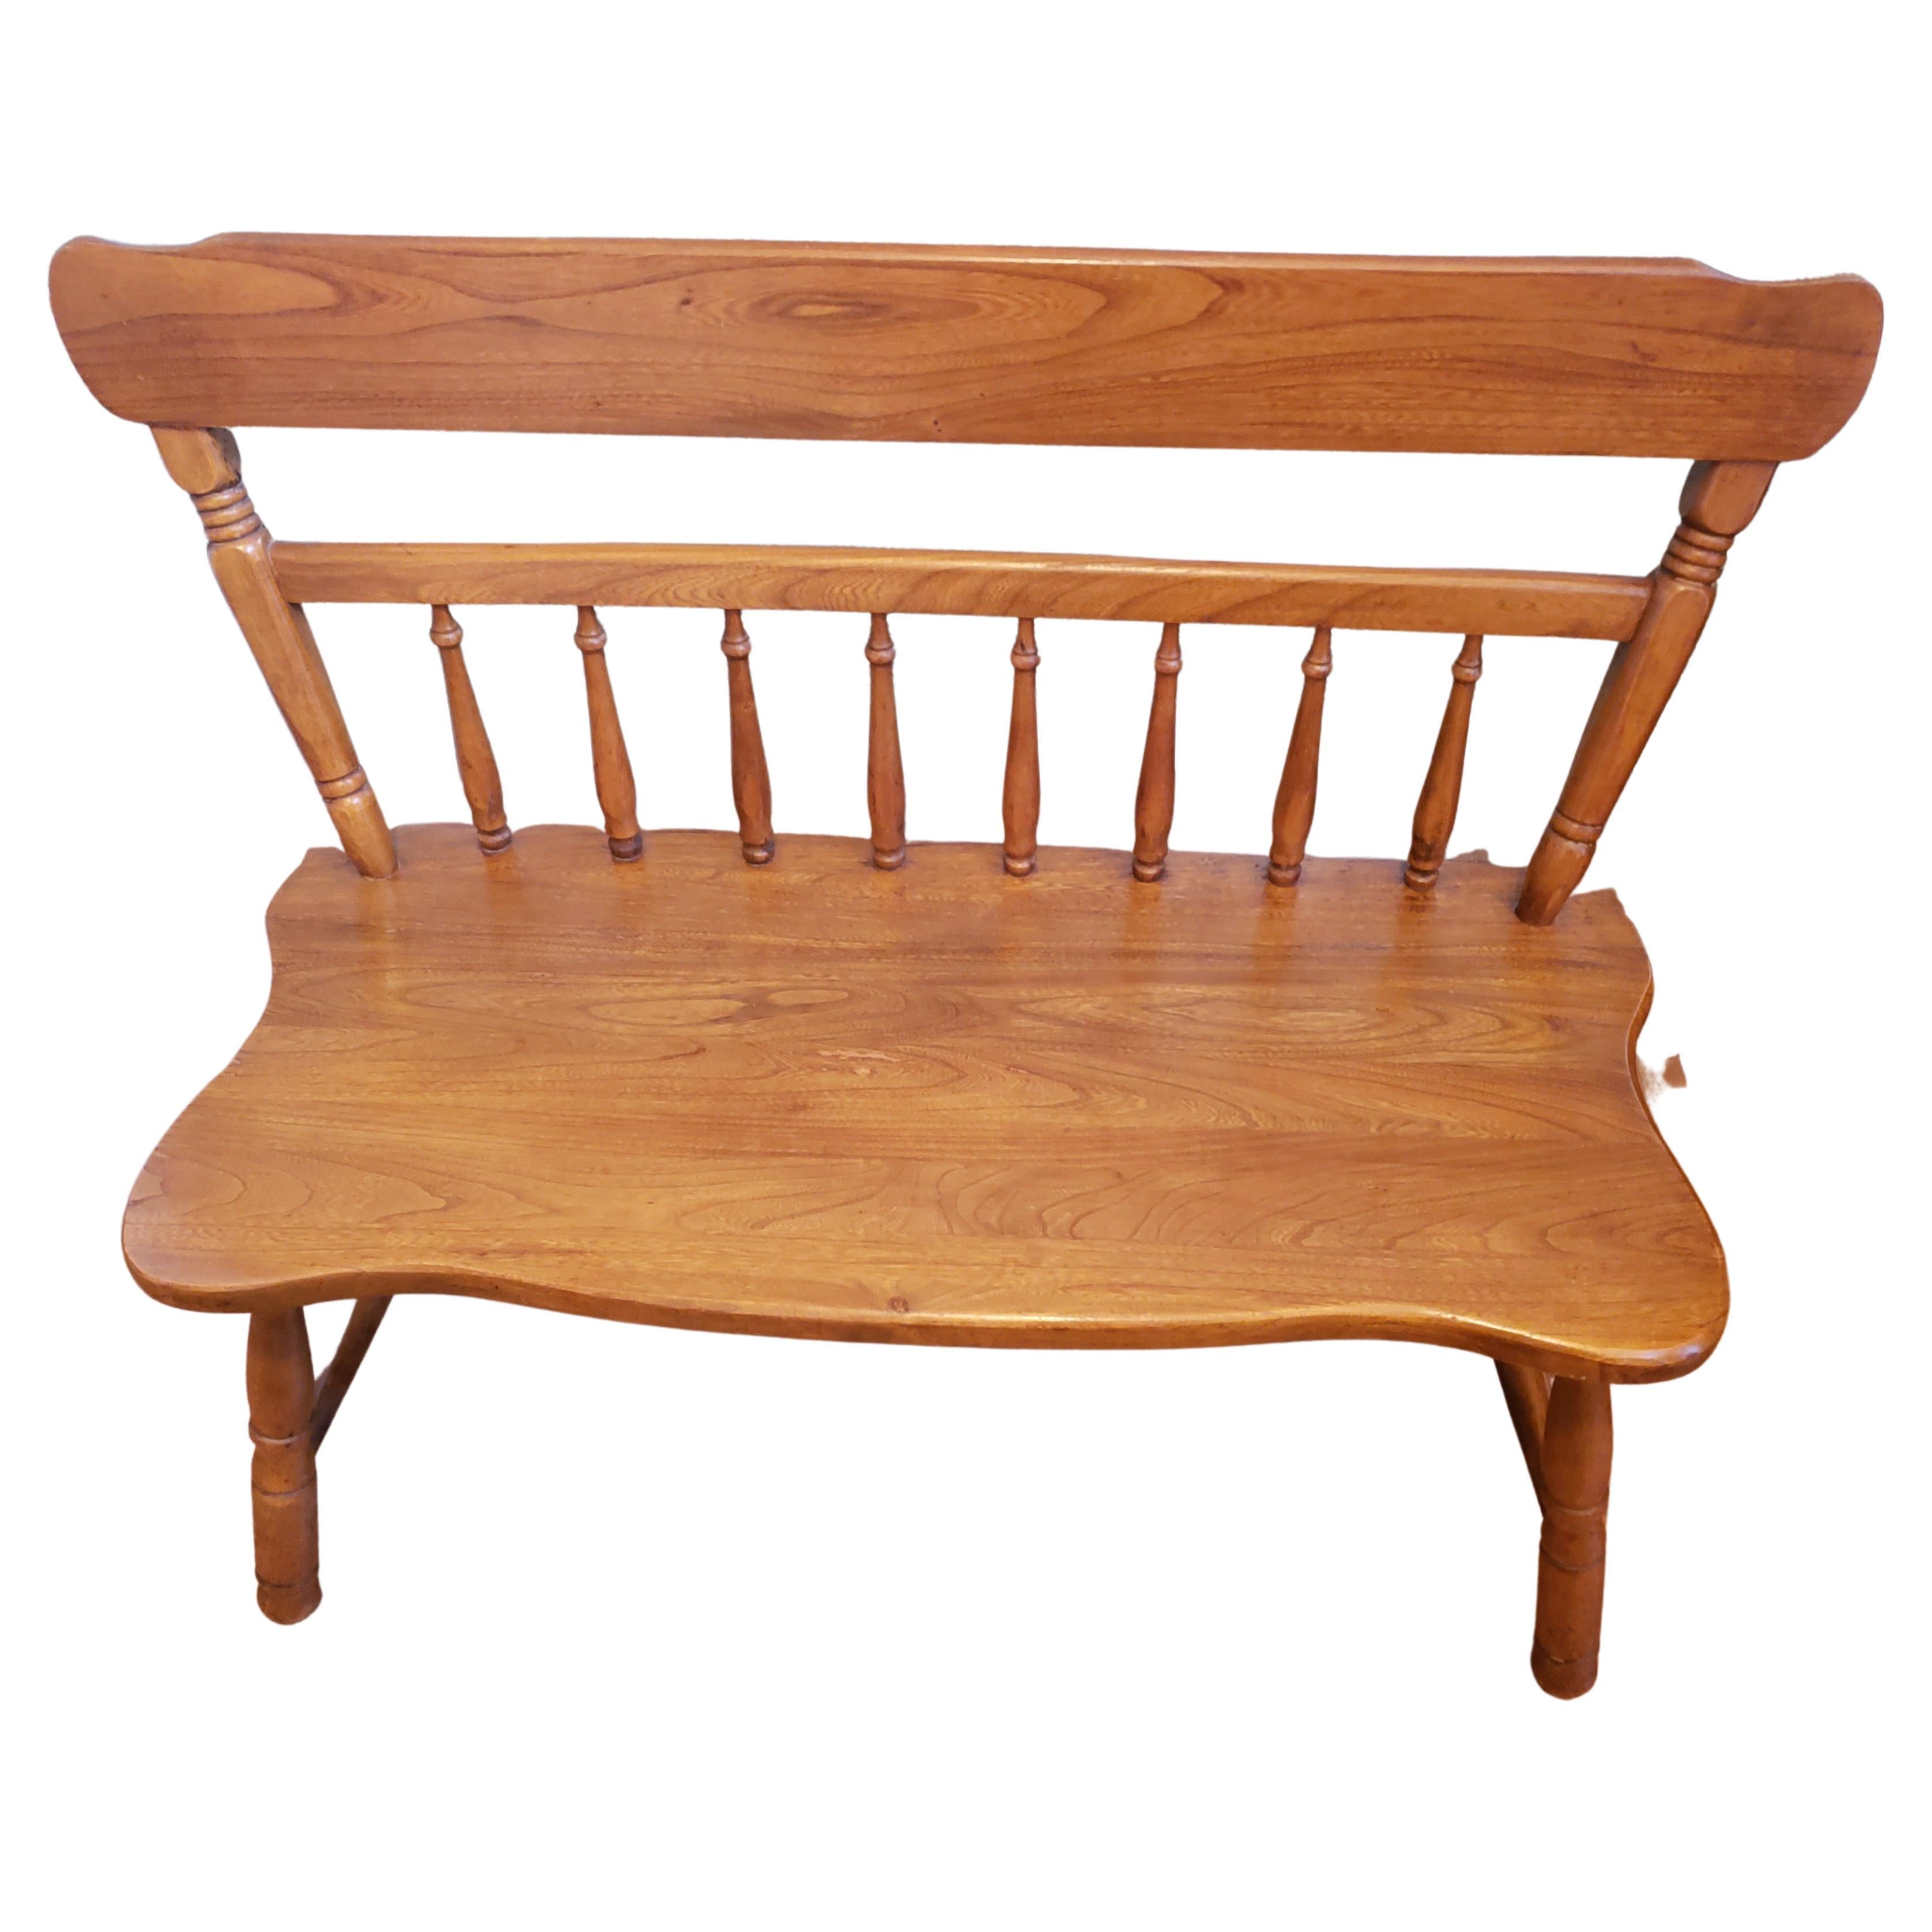 Solid wood farmhouse style bench or settee with carved spindle and ladder back and beautifully turned legs. This is an heirloom quality piece that will last for generations! At 37